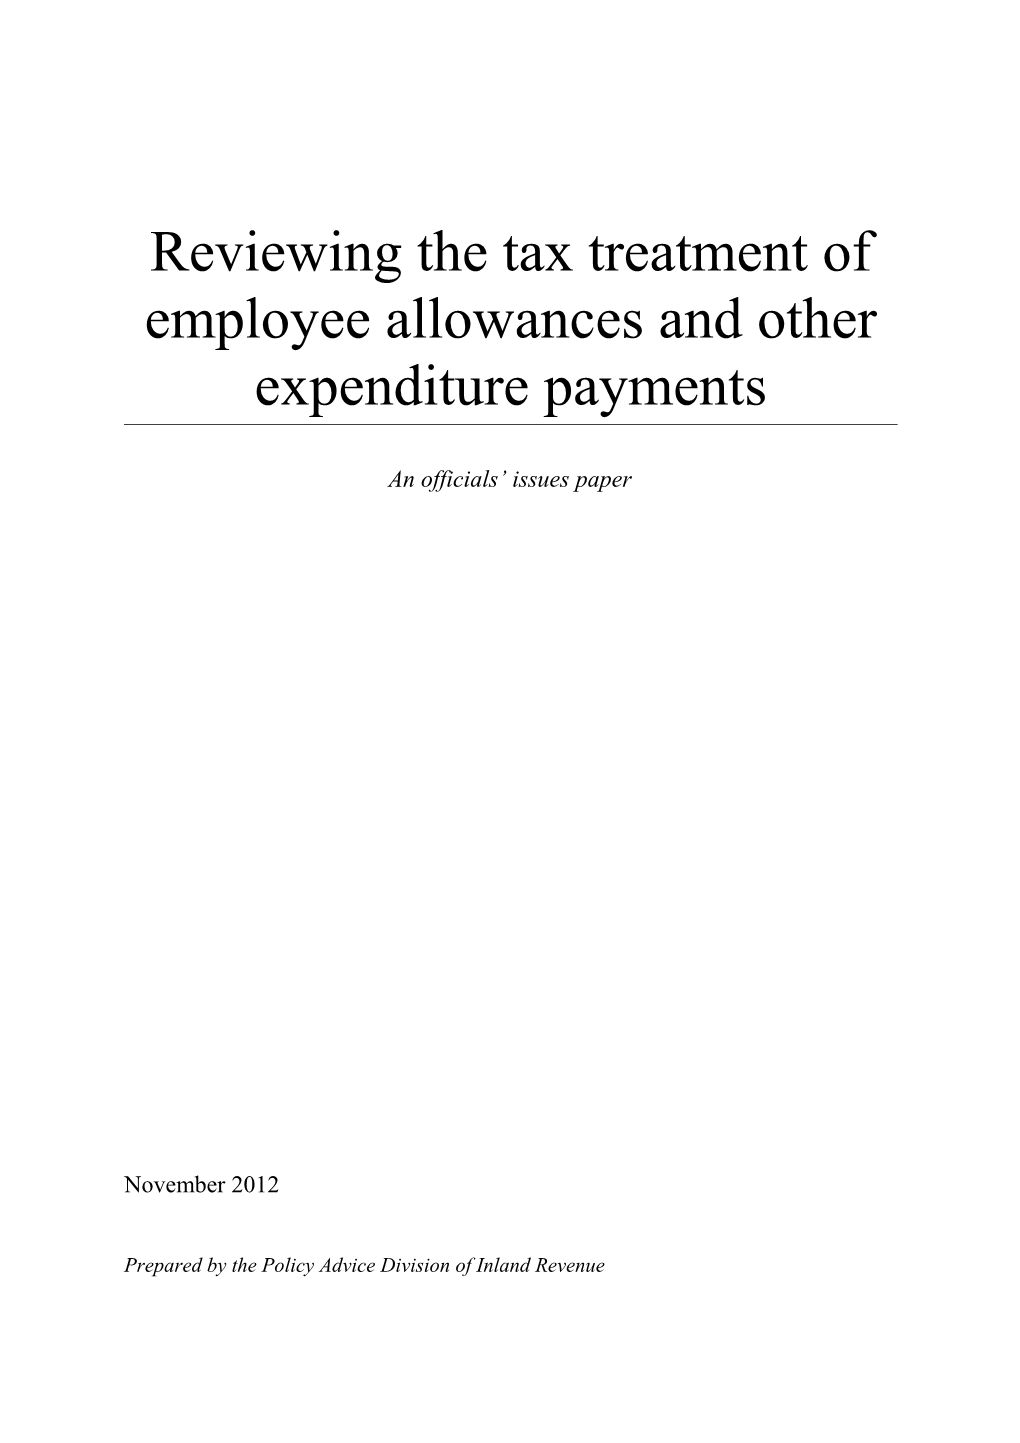 Reviewing the Tax Treatment of Employee Allowances and Other Expenditure Payments - An